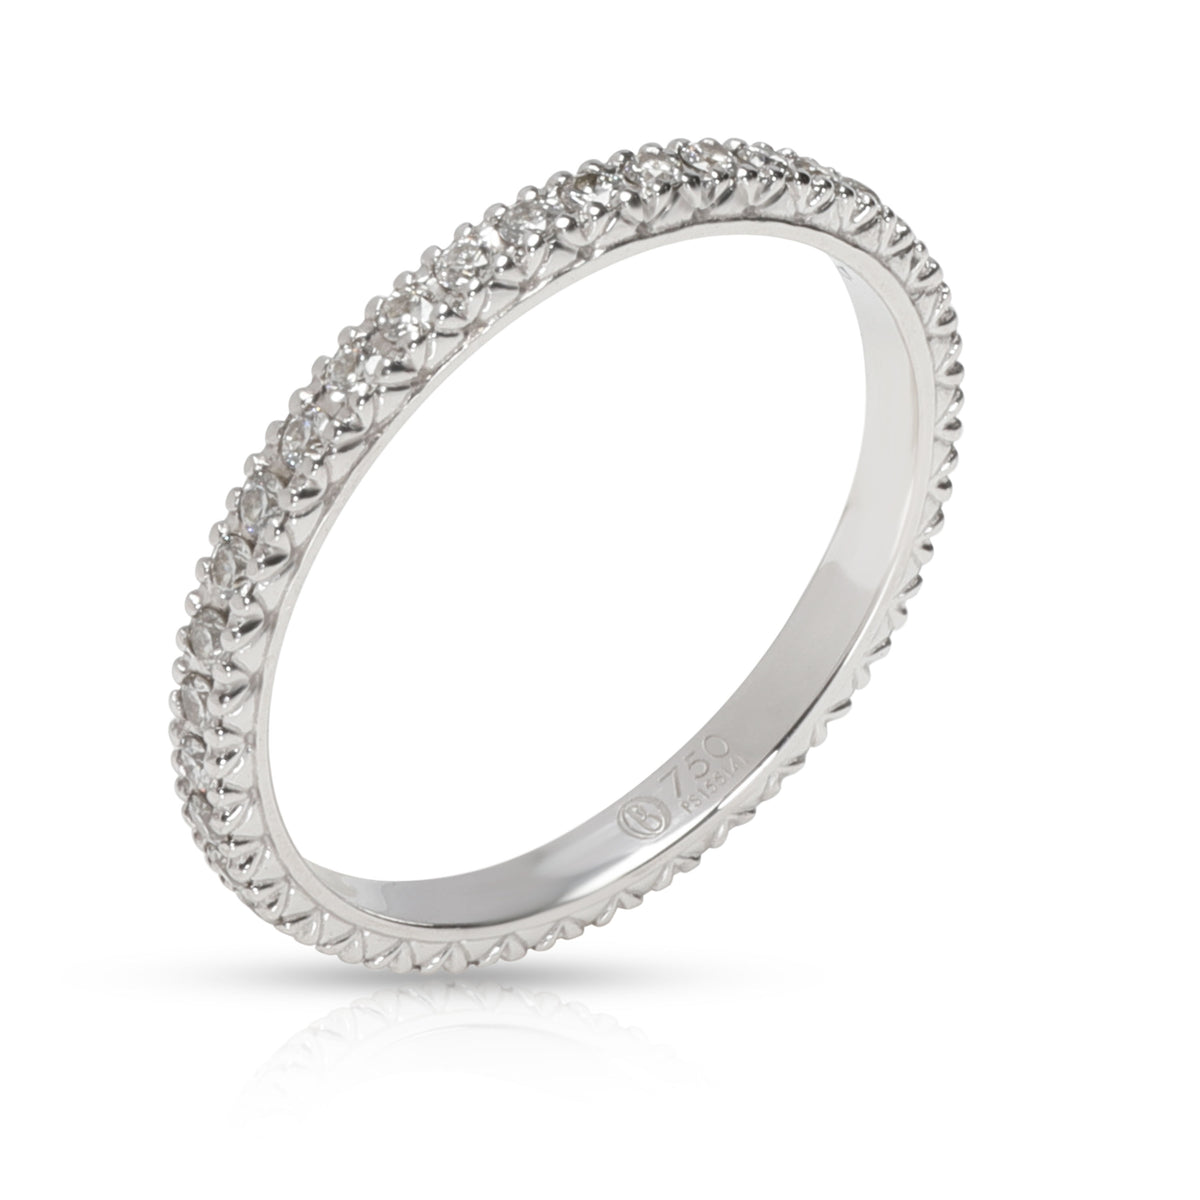 French Pave Diamond Eternity Band in 18K White Gold 0.33 CTW